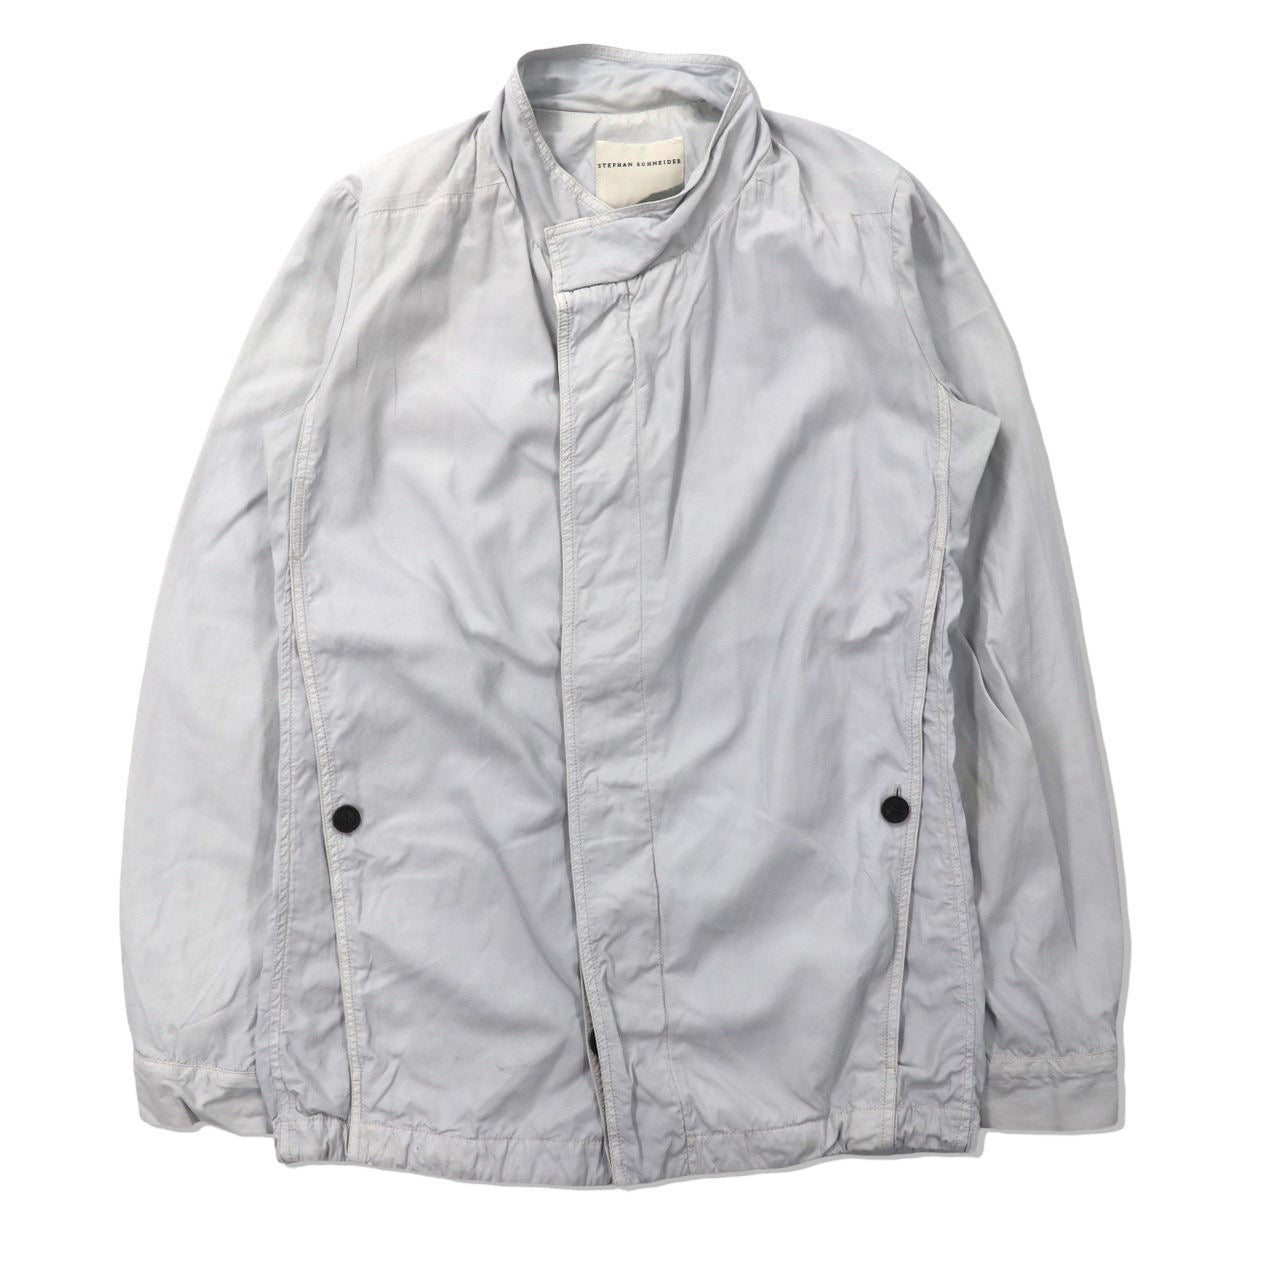 Stephan Schneider x Edition Stand Color Jacket 3 Gray Cotton